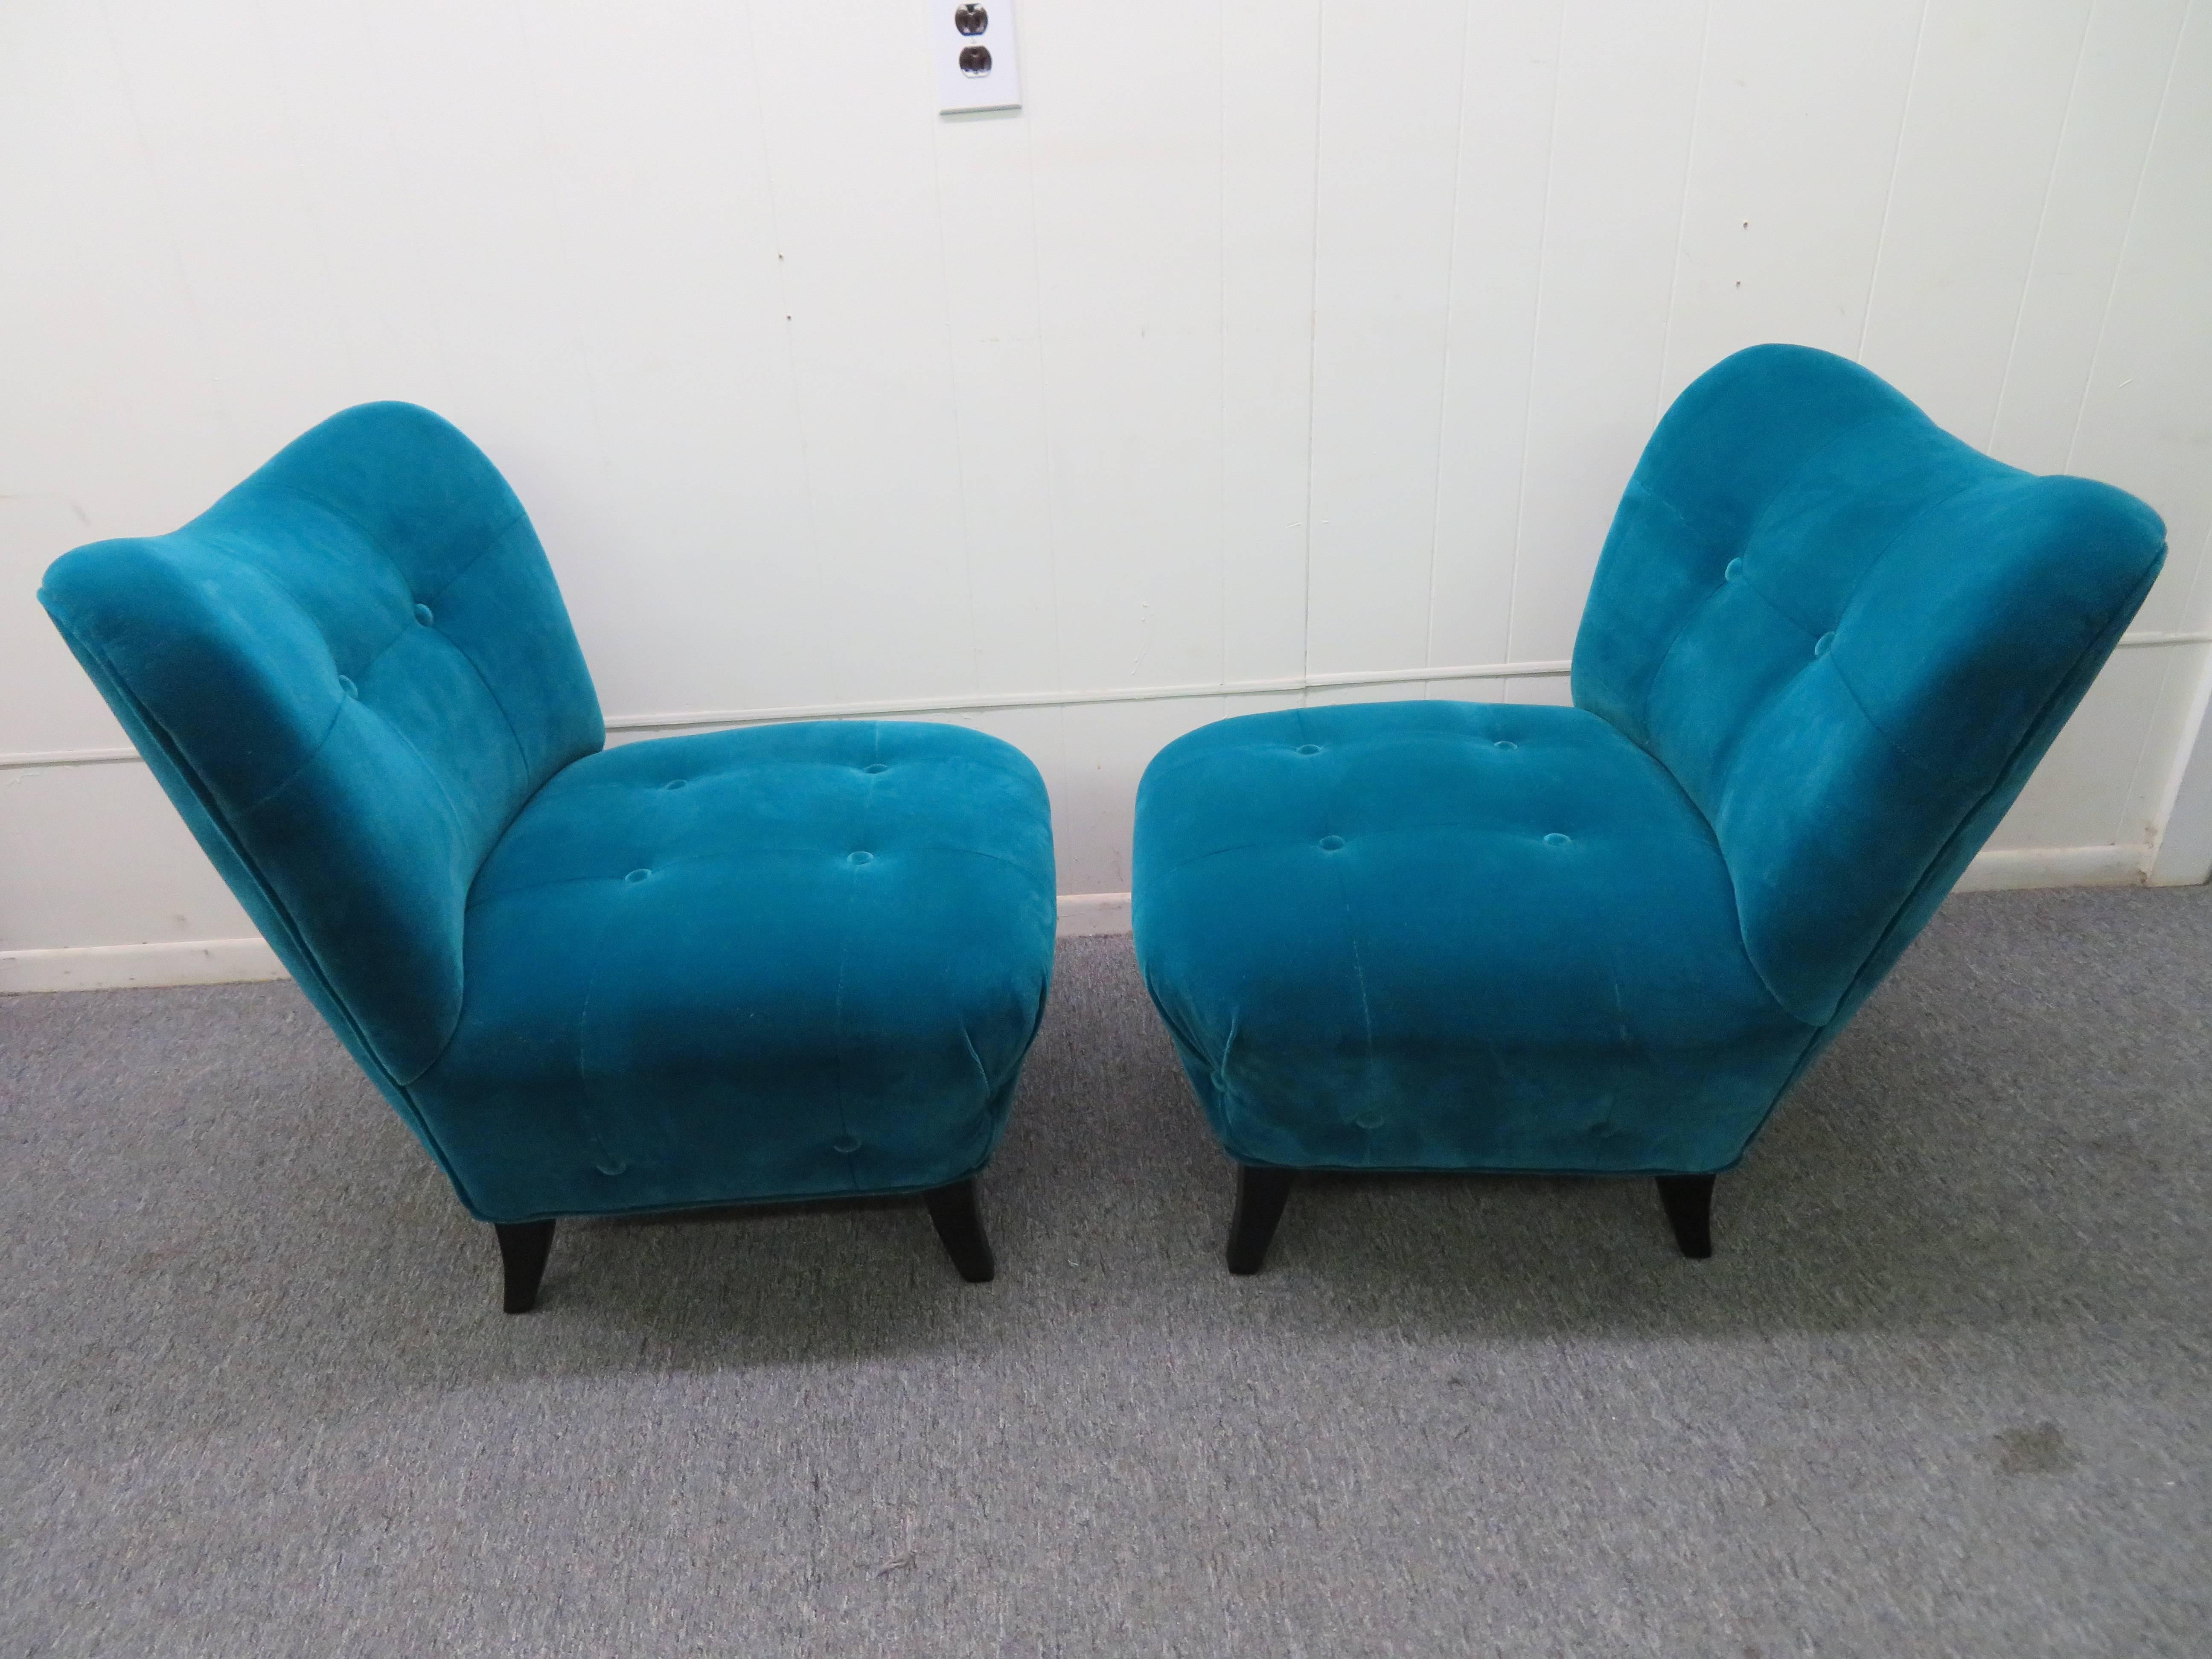 American Excellent Pair of Gilbert Rohde Style Mohair Slipper Chairs, Mid-Century Modern For Sale